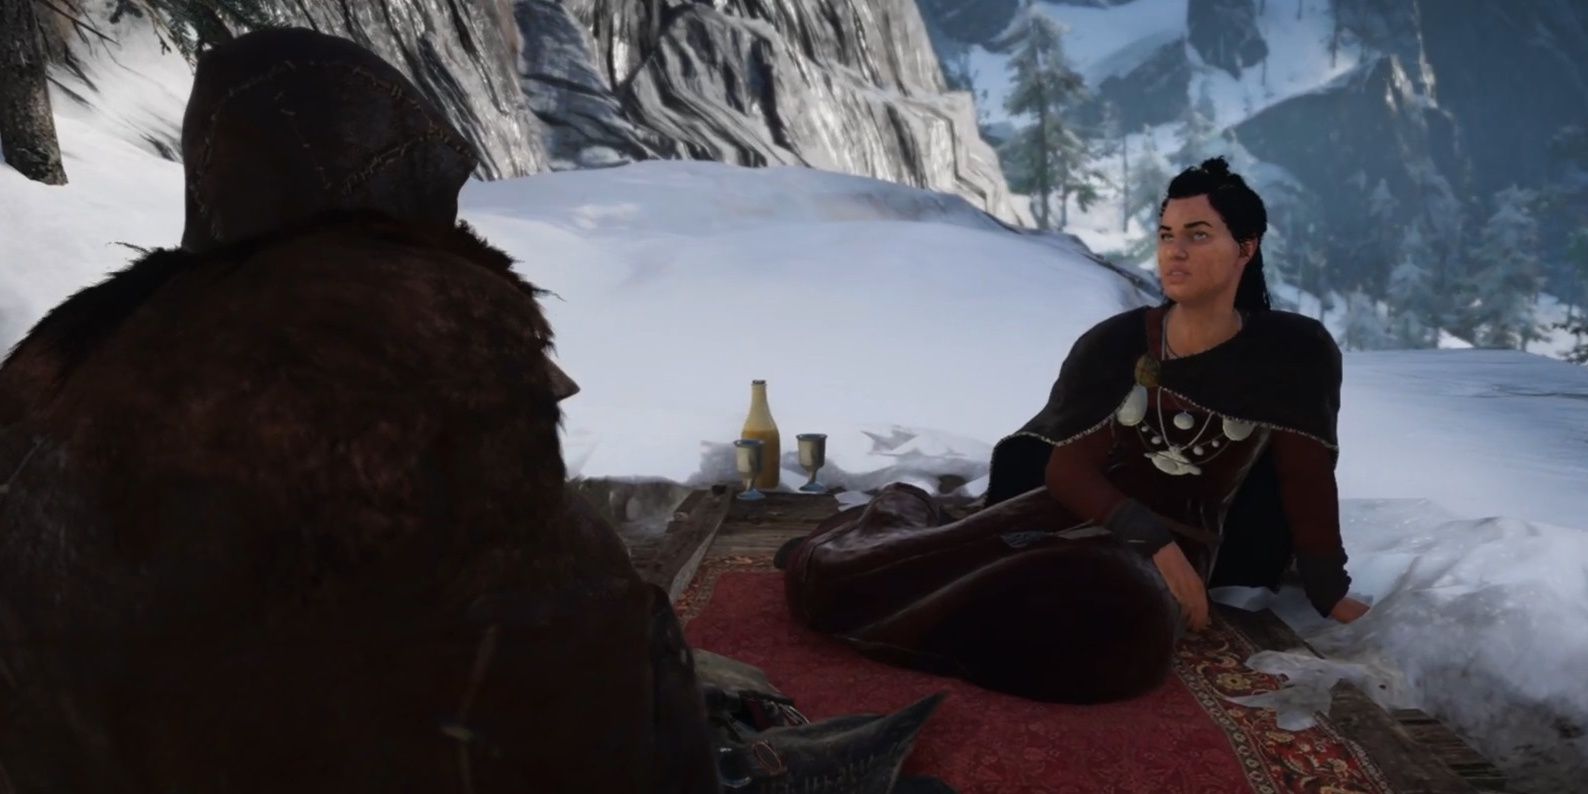 Bil sitting on a carpet in a snowy setting in Assassin's Creed Valhalla.